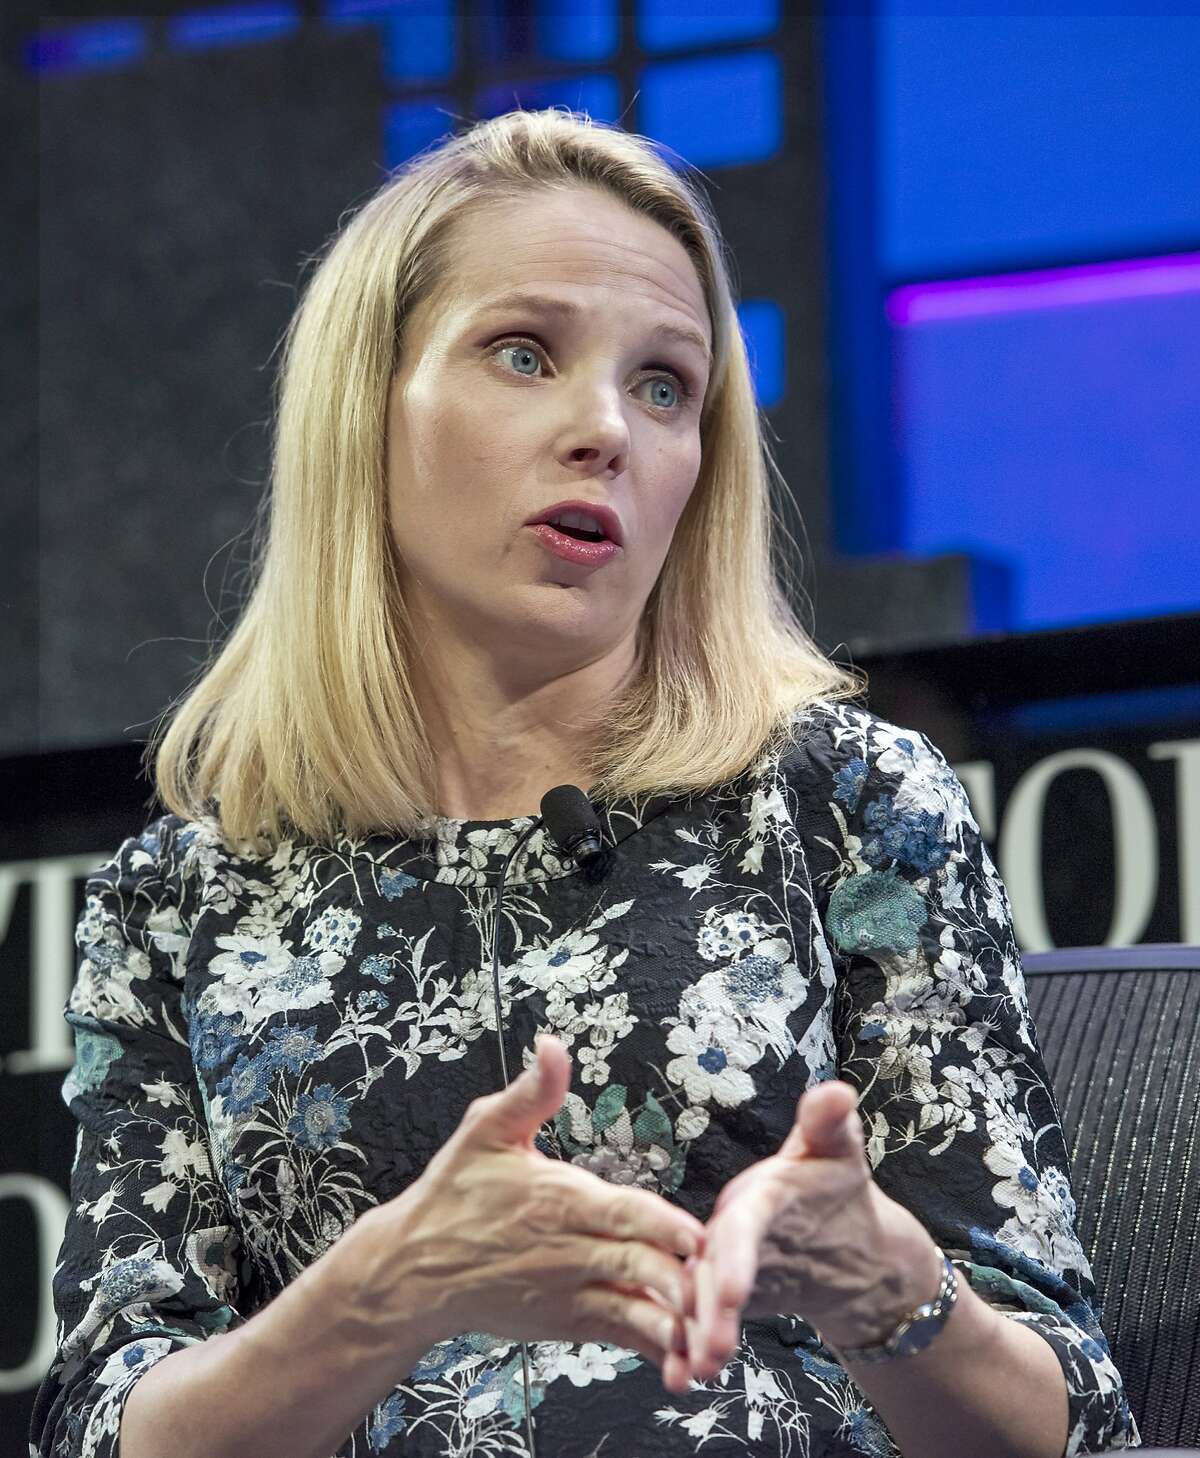 Marissa Mayer, president and chief executive officer of Yahoo Inc., at the 2015 Fortune Global Forum in San Francisco in November. Mayer, who has overseen falling sales in 7 of the past 10 quarters, promised to detail a plan to cut costs and boost growth when quarterly earnings are released Tuesday. Must credit: Bloomberg photo by David Paul Morris.